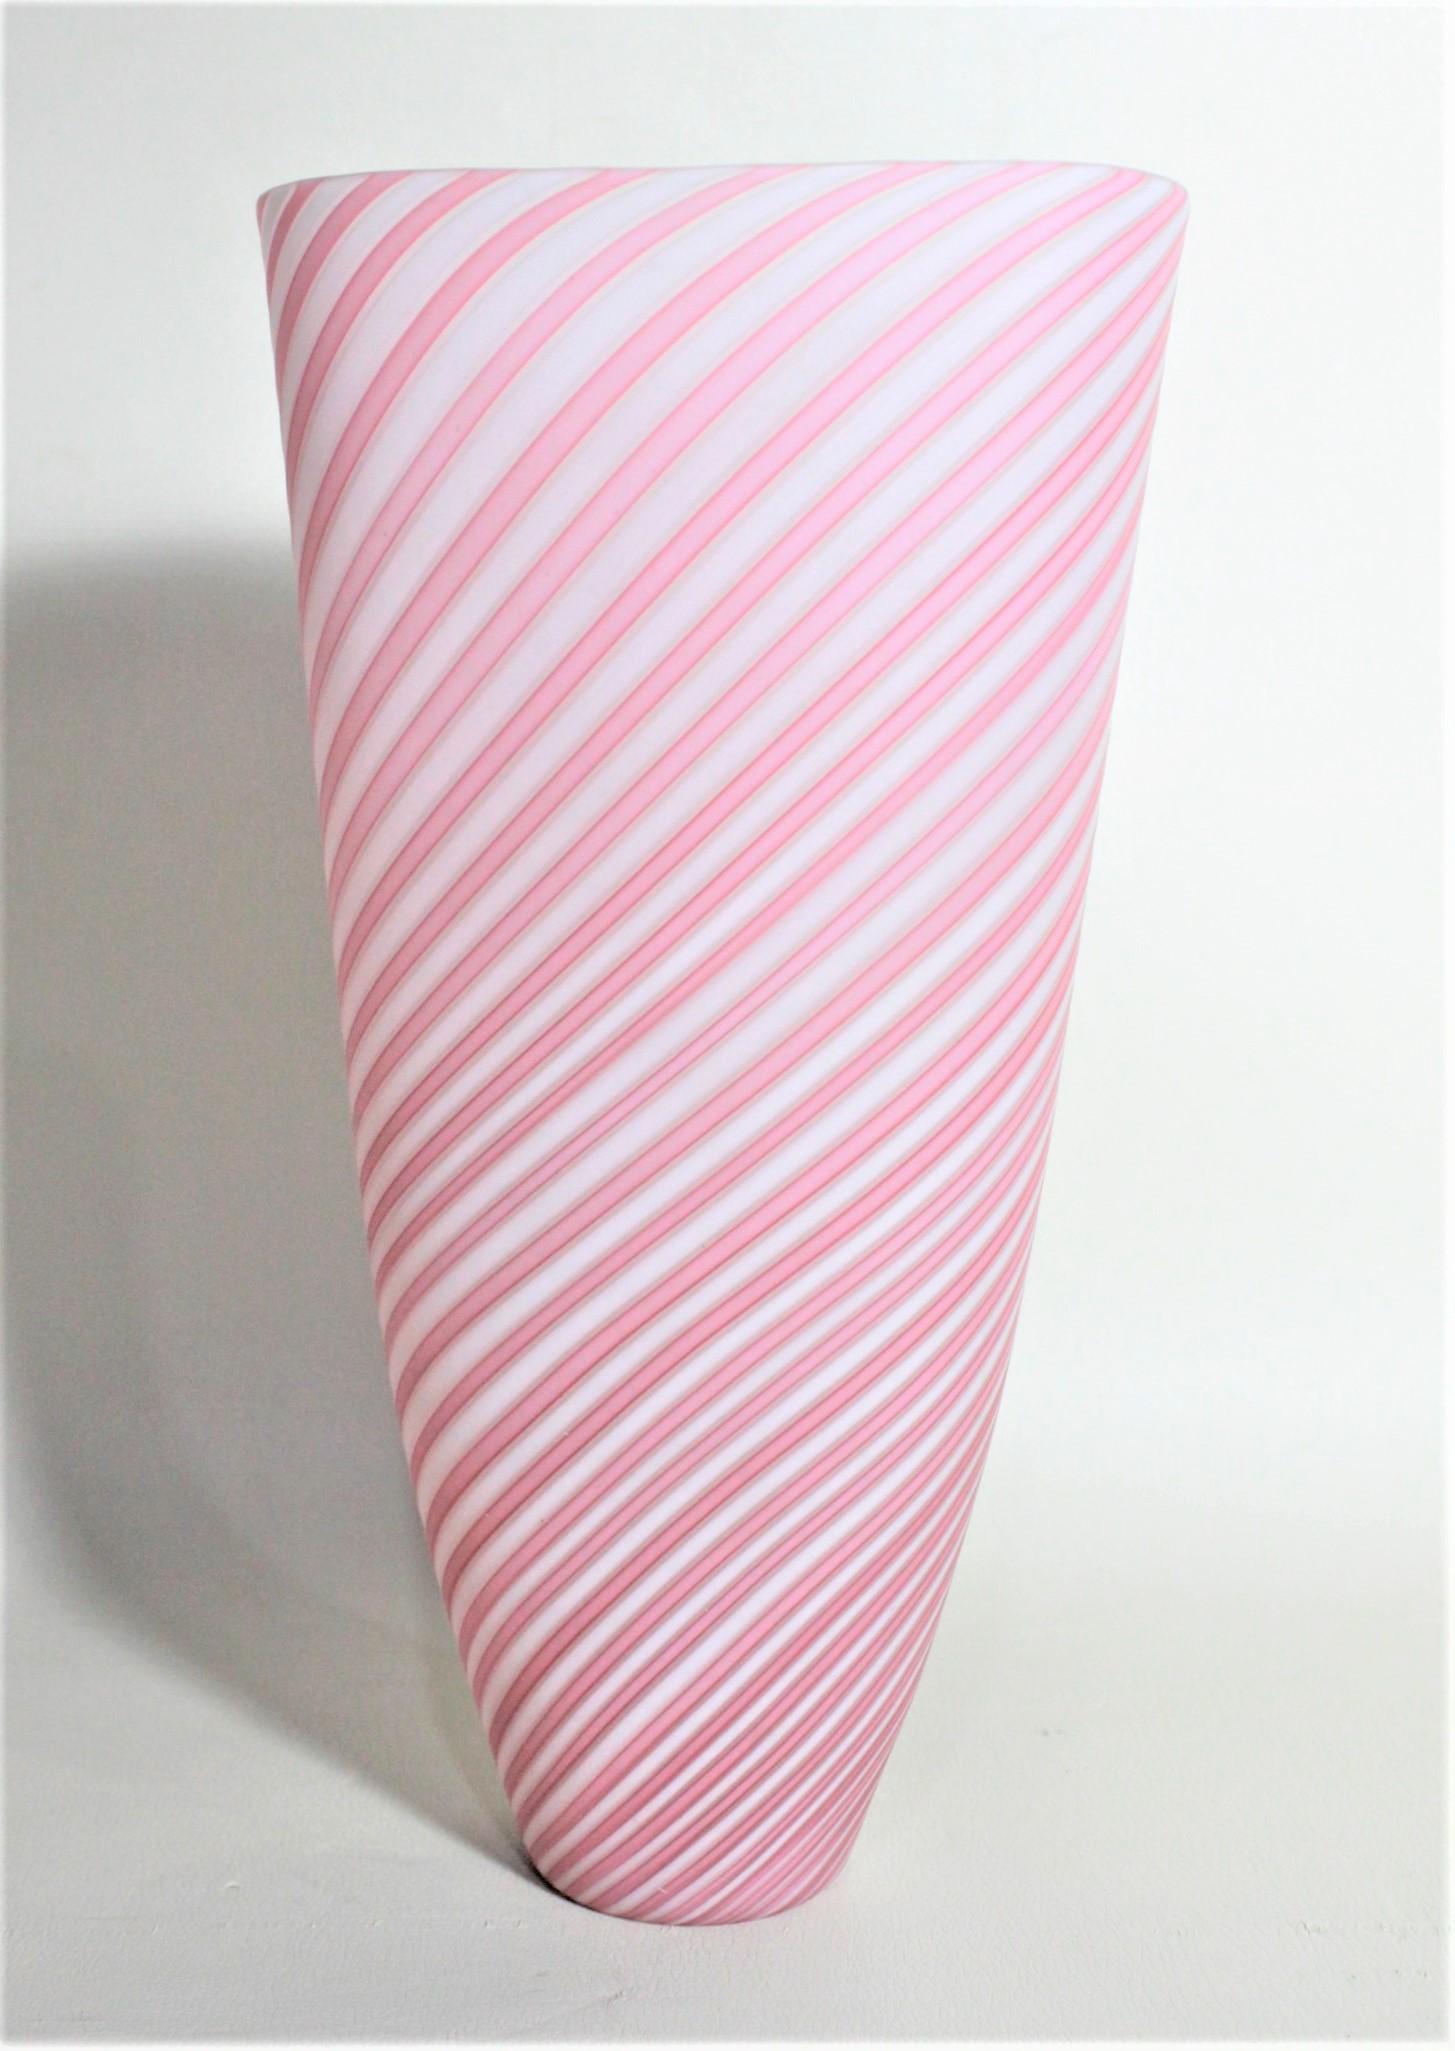 Hand-Crafted Mid-Century Modern Murano Cranberry or Pink and White Striped Art Glass Vase